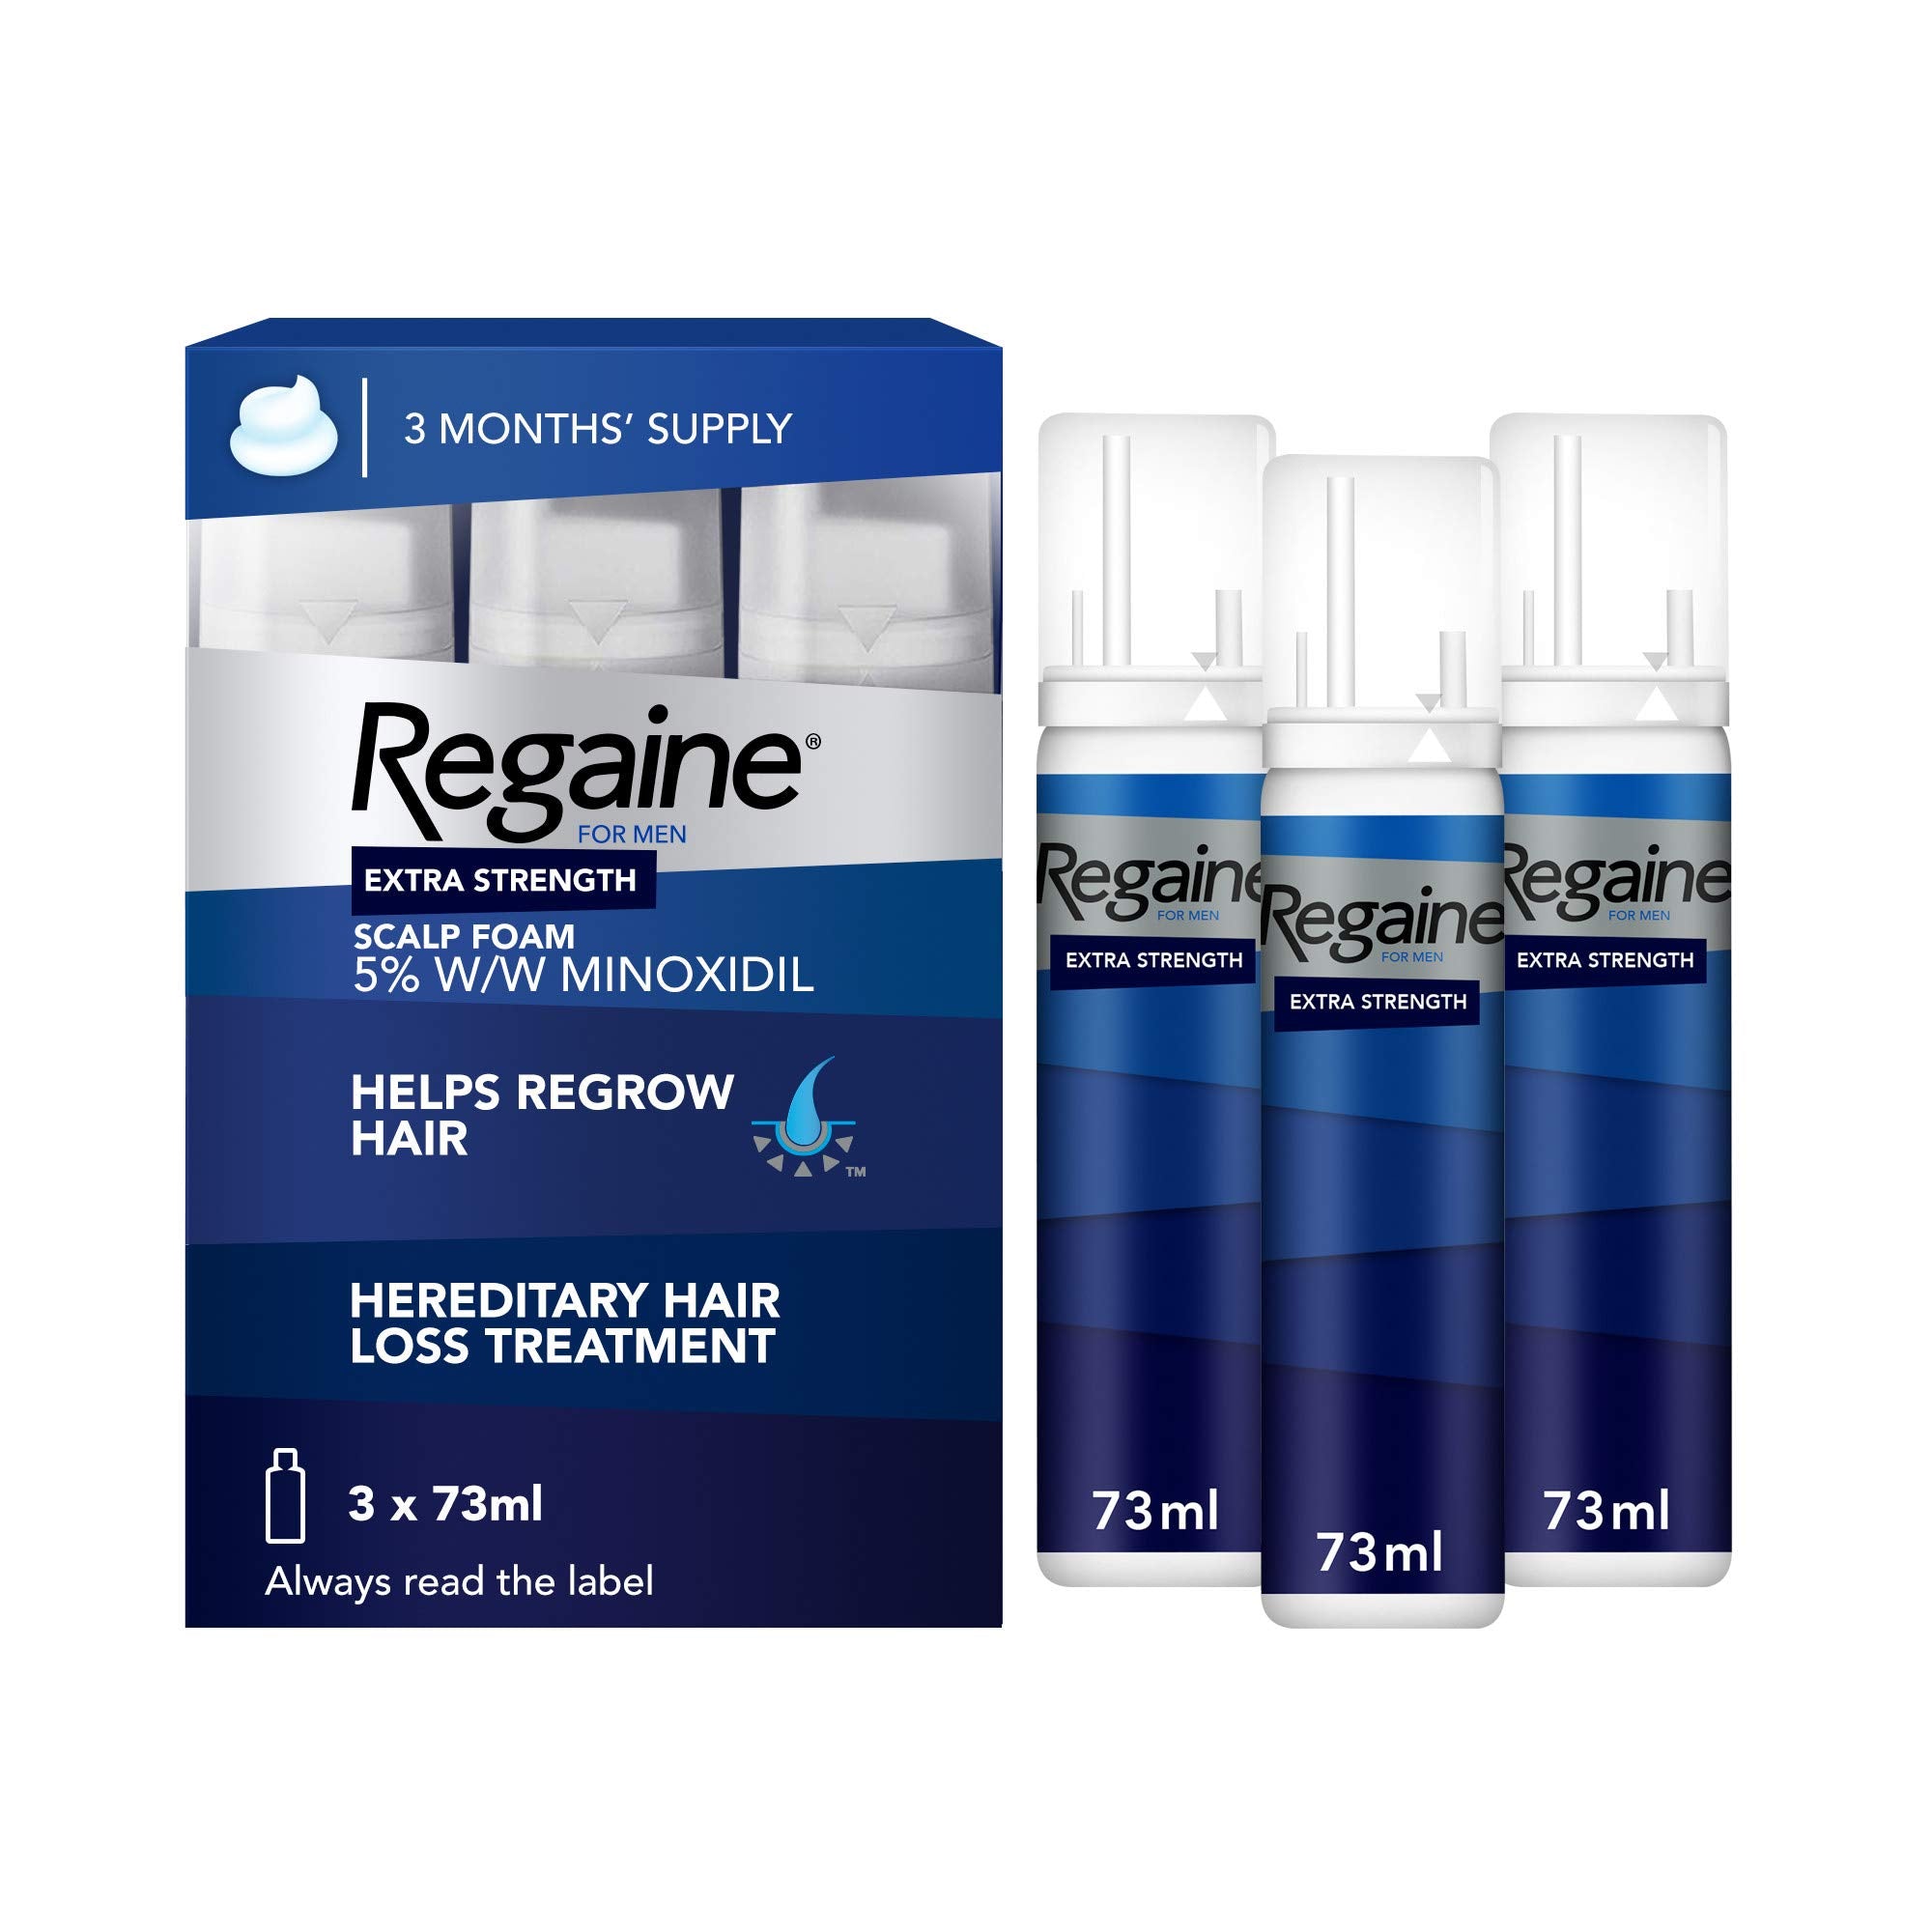 Regaine for Men Hair Loss & Hair Growth Scalp Foam Treatment with Minoxidil, 3 Month Supply,3 Units x 73 ml, Packaging May Vary